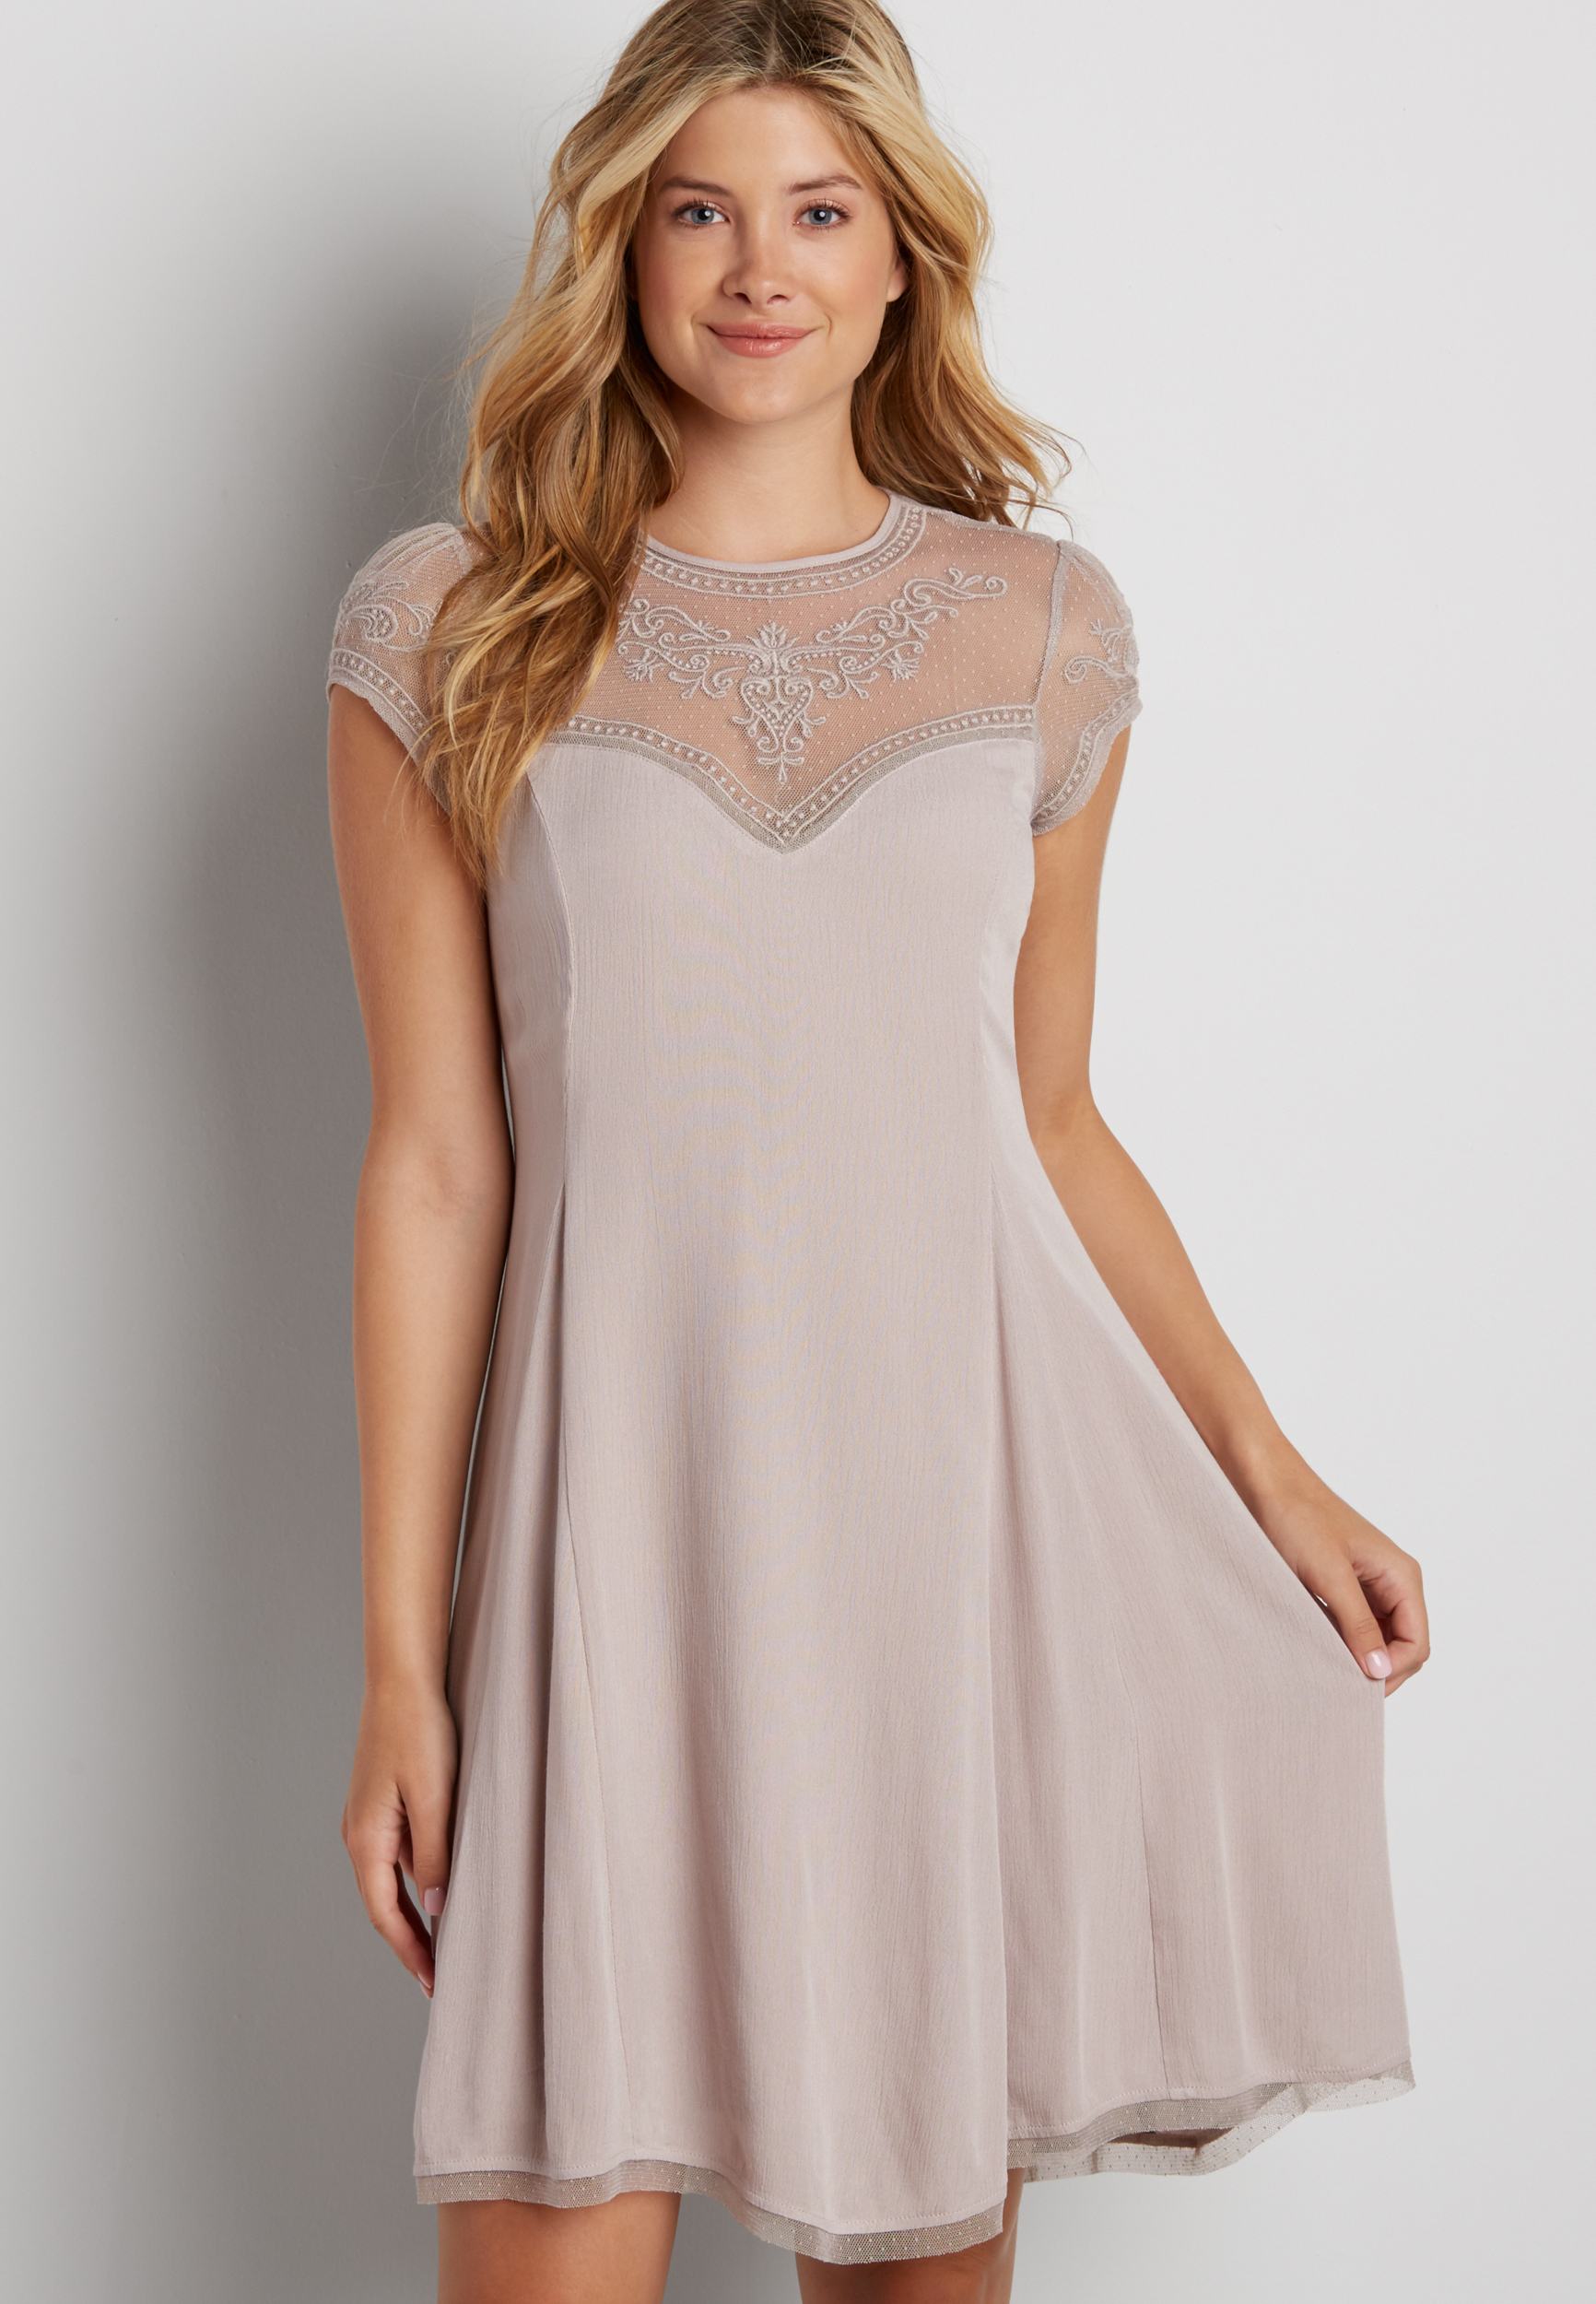 dress with embroidered yoke and short sleeves in storm cloud | maurices